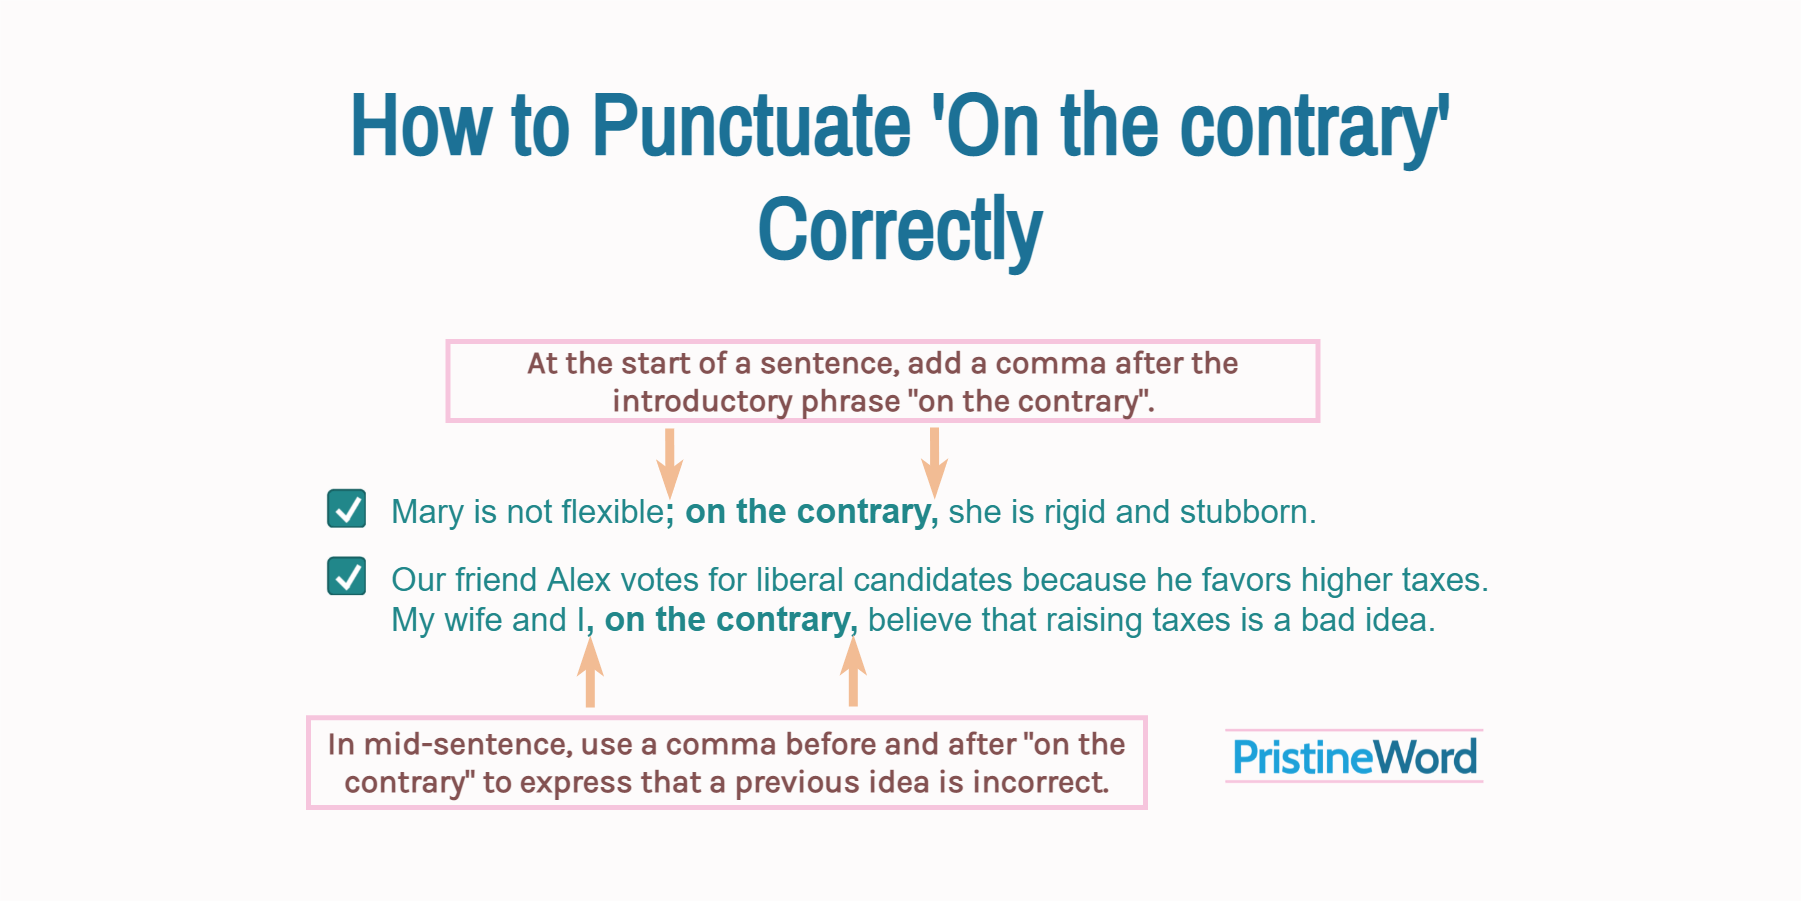 How to Punctuate 'On the contrary' Correctly